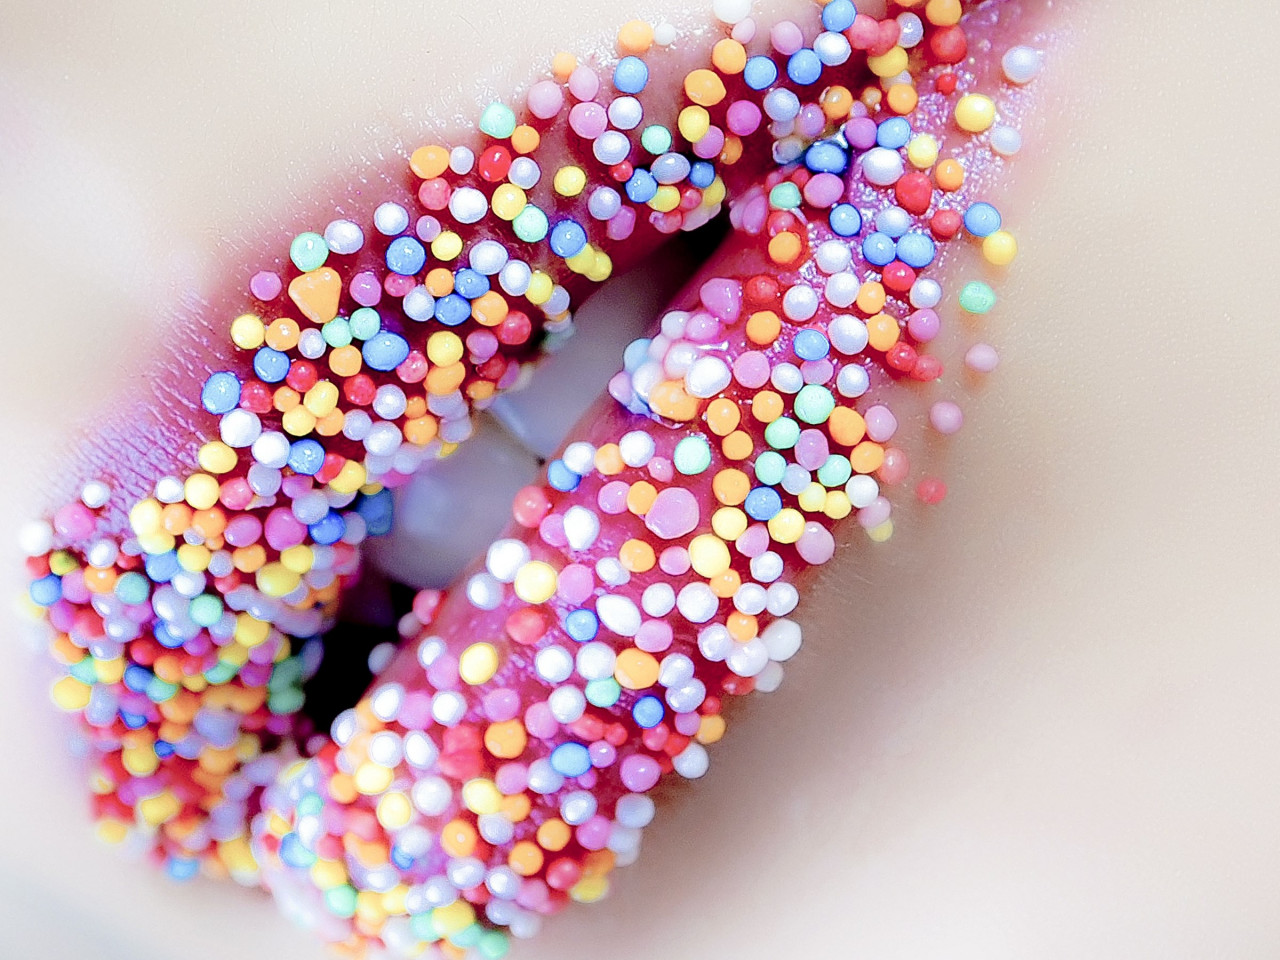 Lips with sweets wallpaper 1280x960